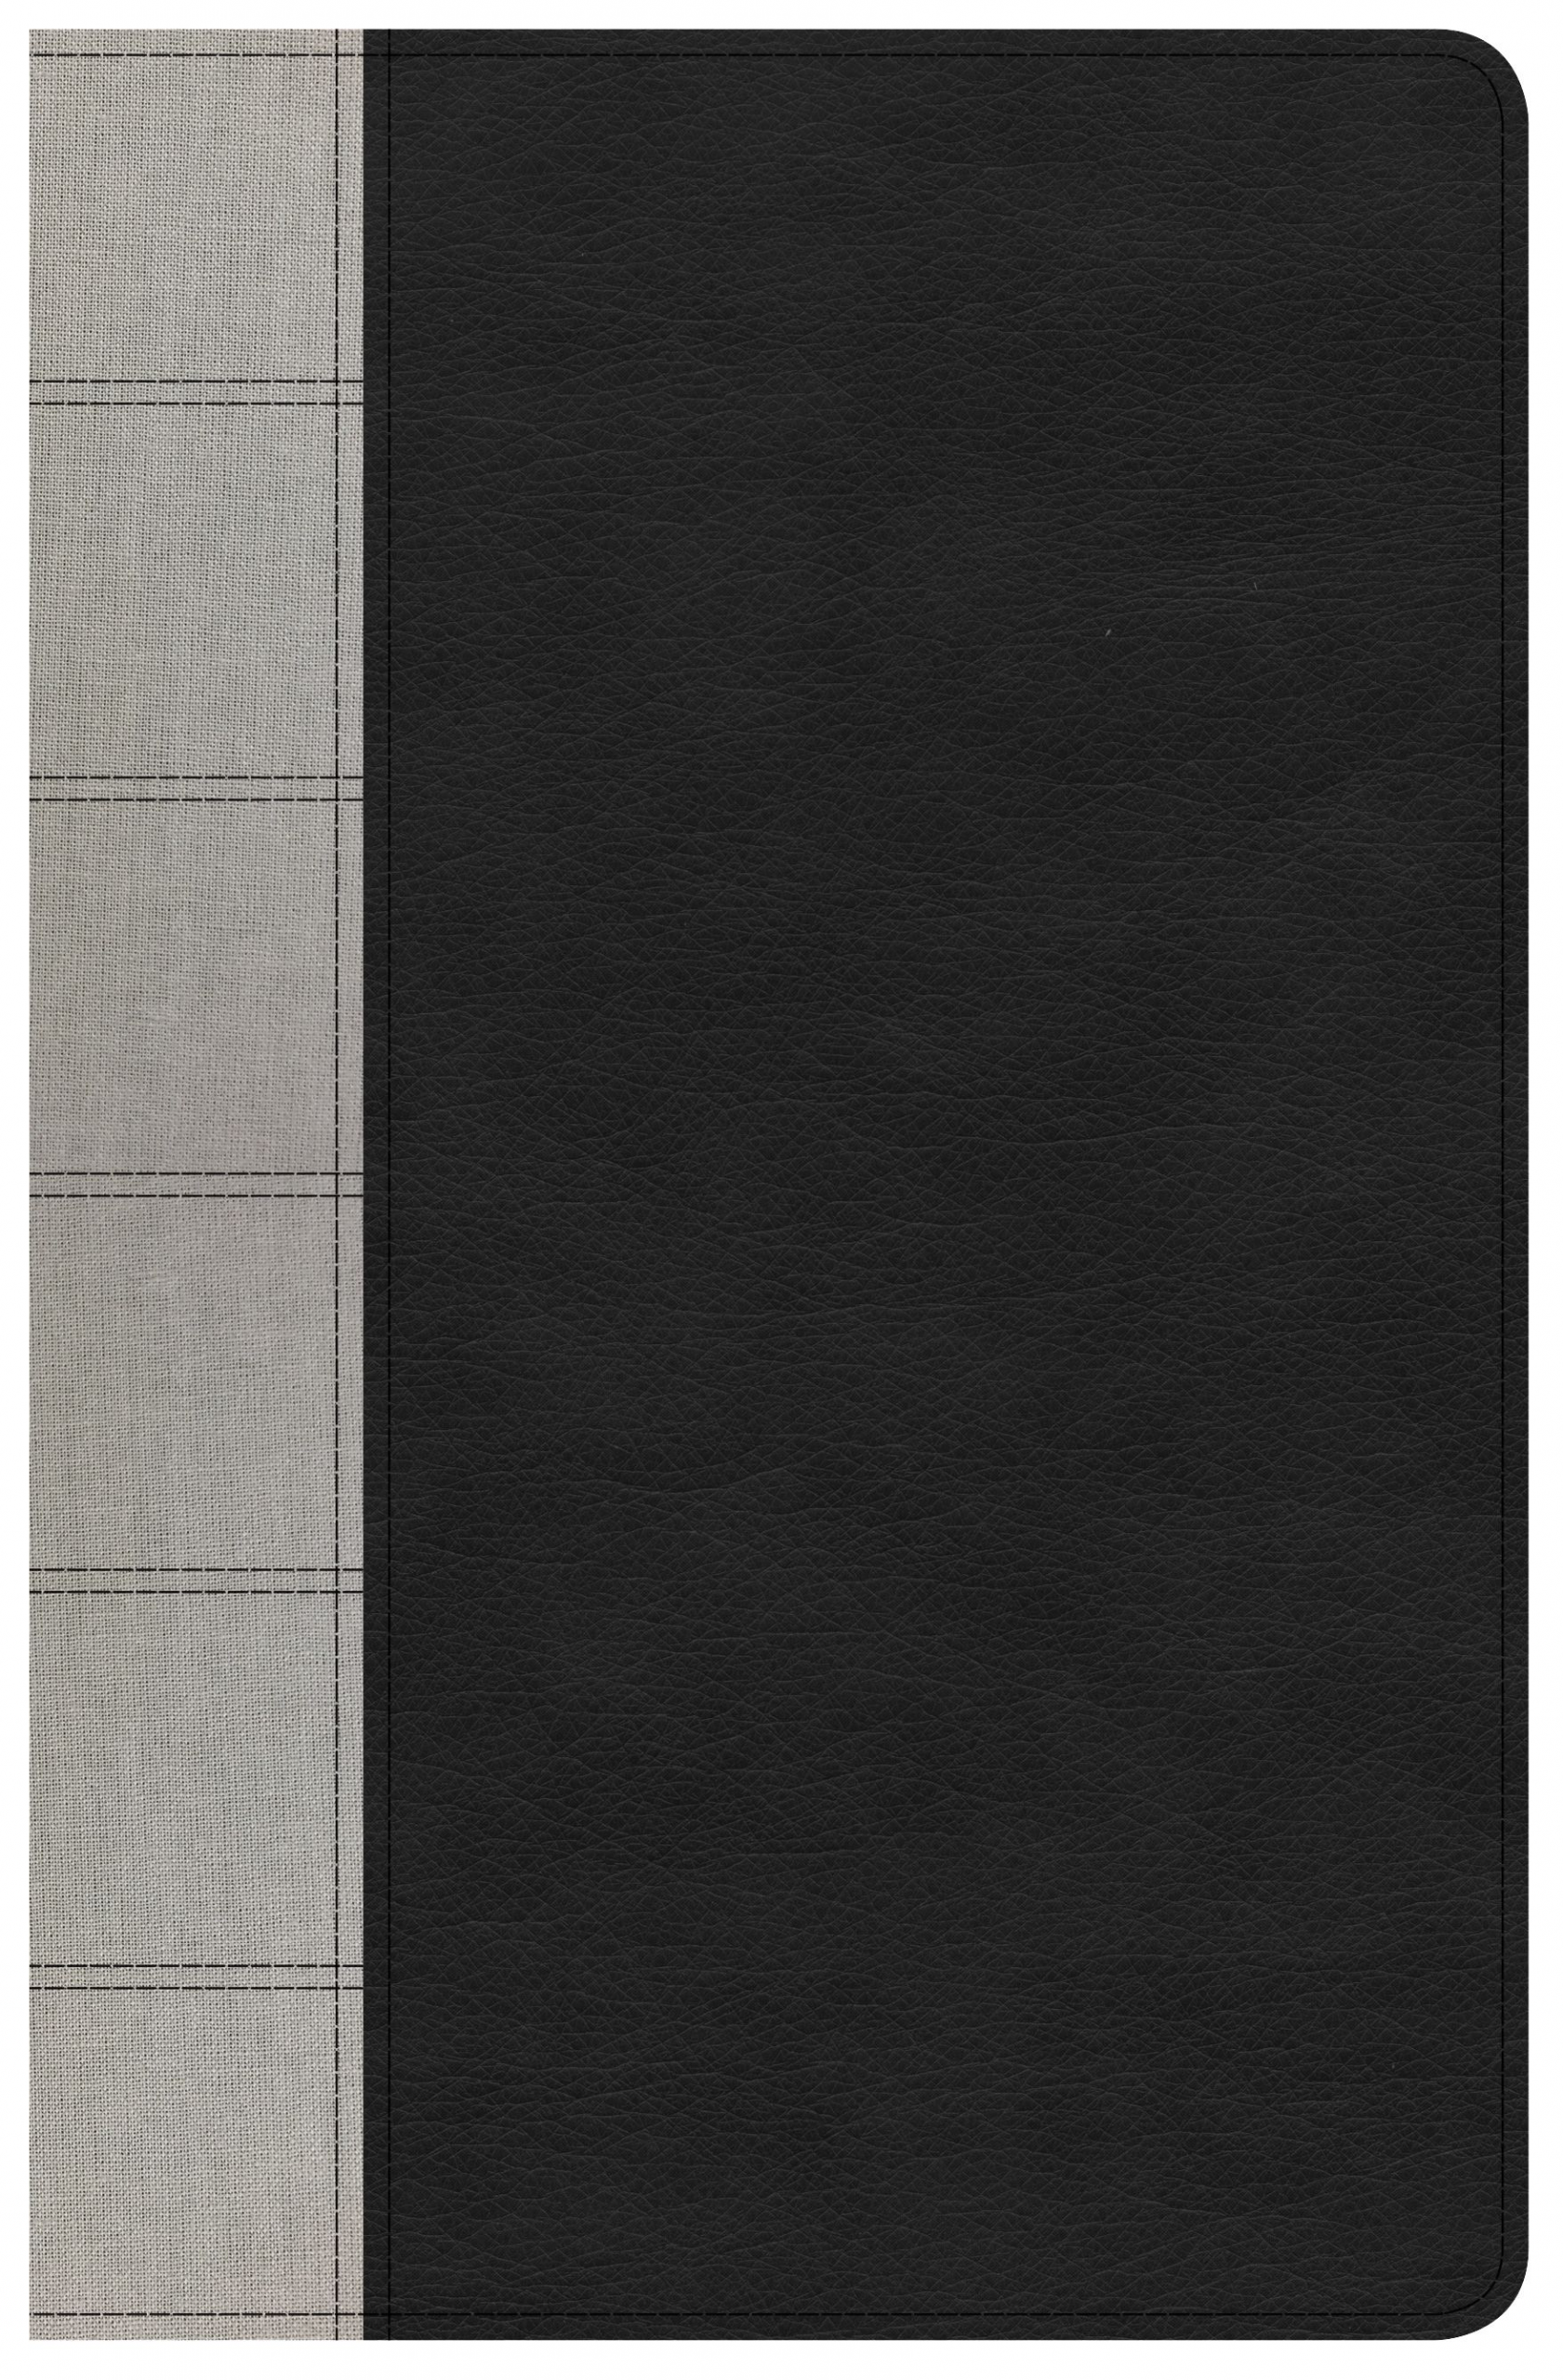 KJV Large Print Personal Size Reference Bible, Black/Gray Deluxe LeatherTouch